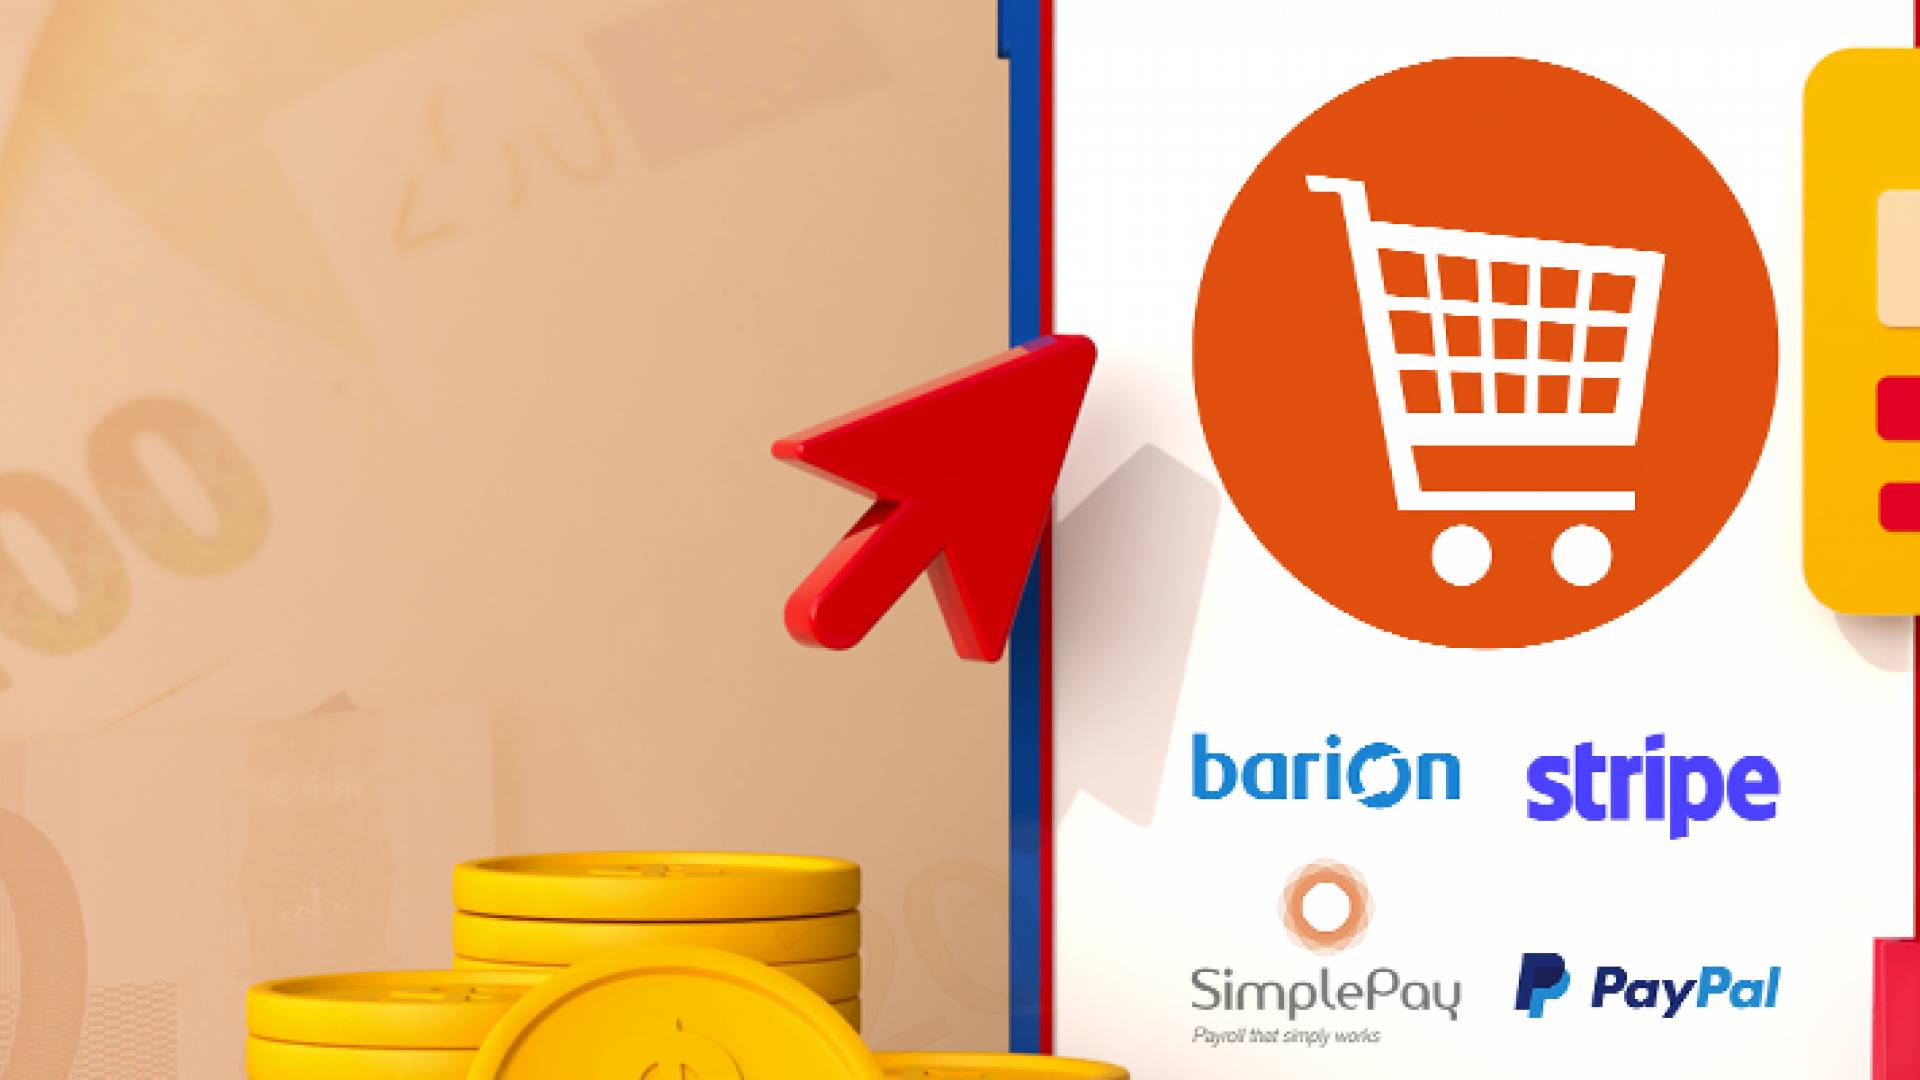 Online credit card payment banner image with barion, stripe, simple pay, and paypal logos